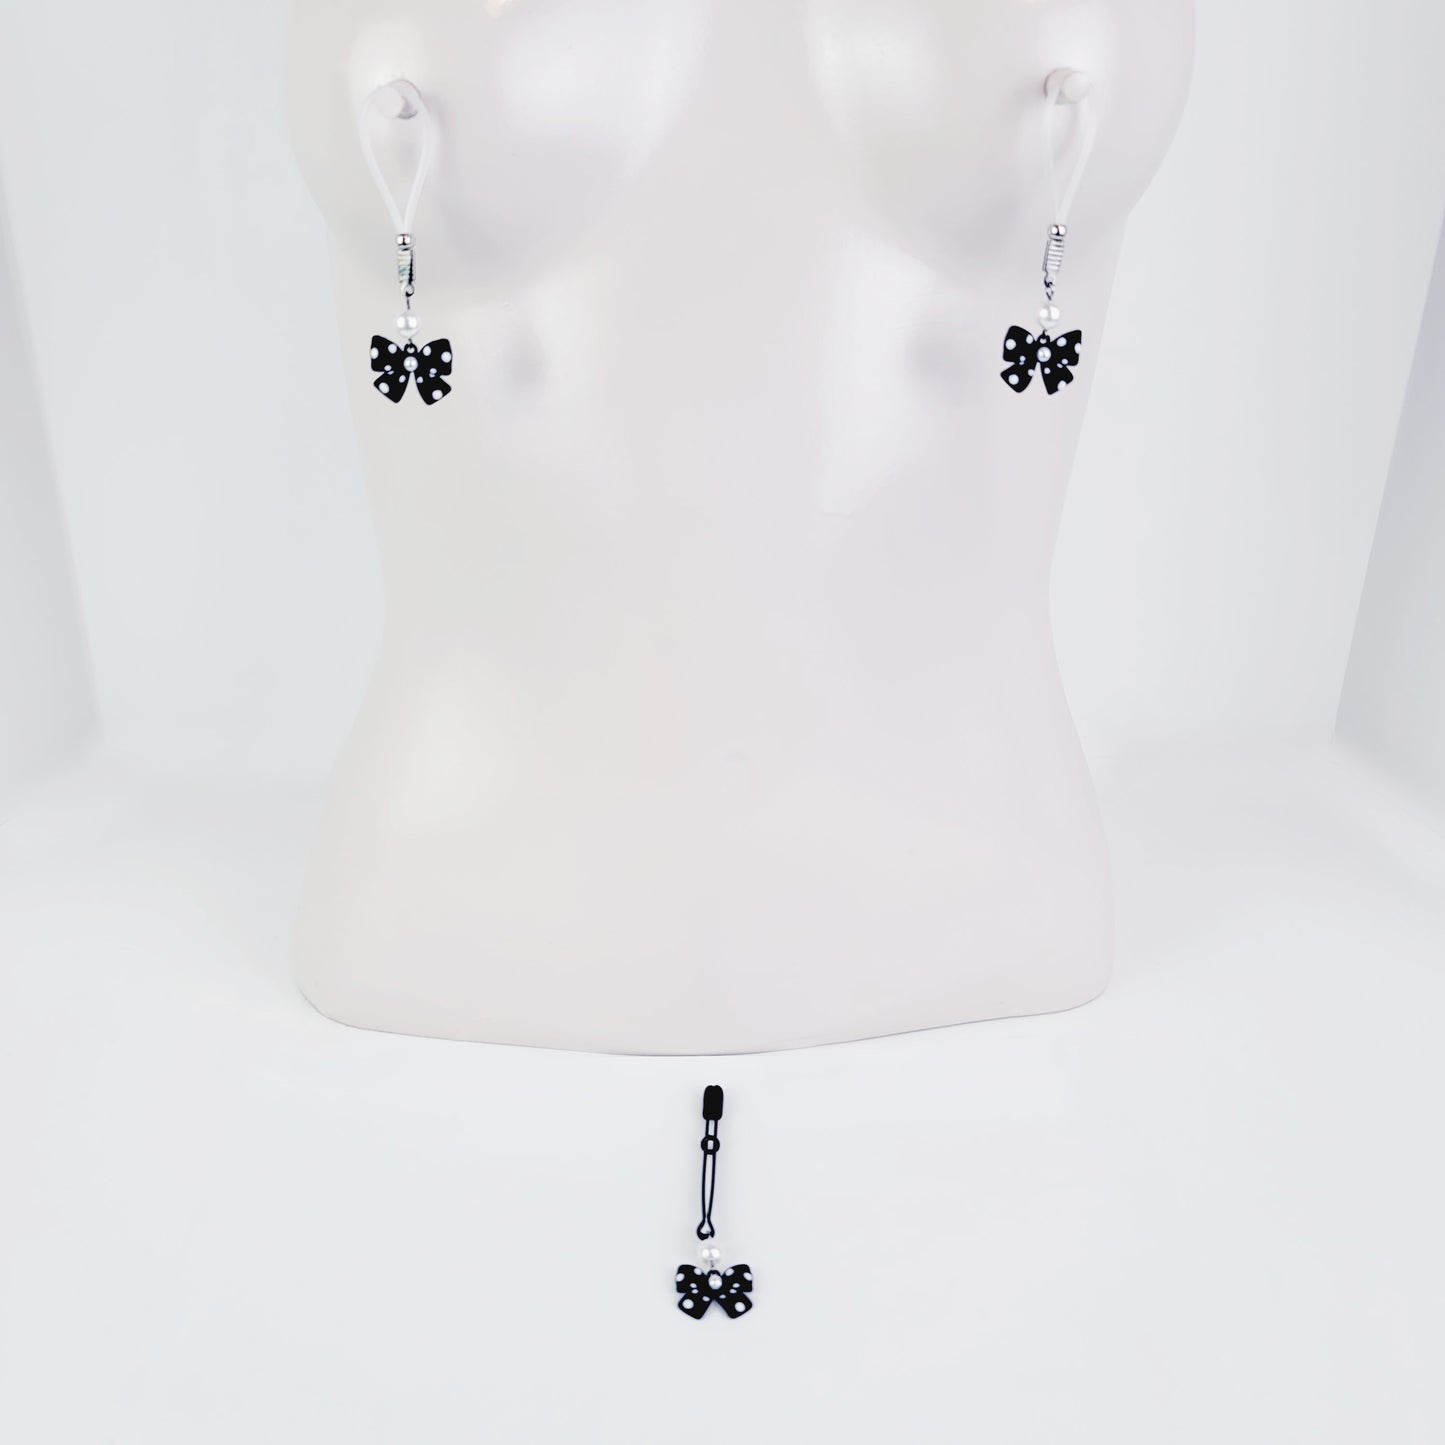 Nipple and Clit Set, Non Piercing, with Bows and Pearls. Choose Nipple Nooses or Your Choice of Nipple Clamps.